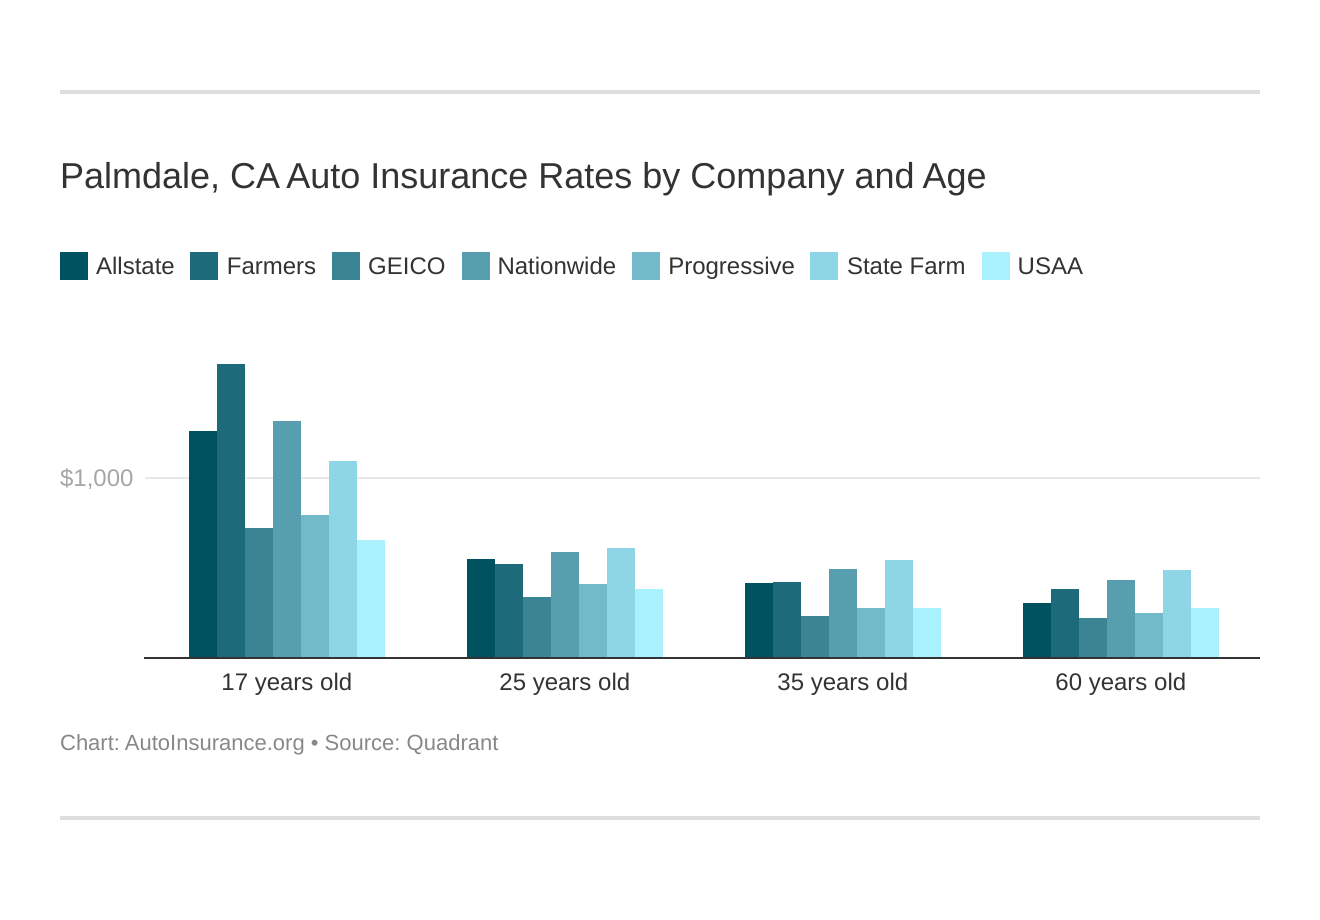 Palmdale, CA Auto Insurance Rates by Company and Age